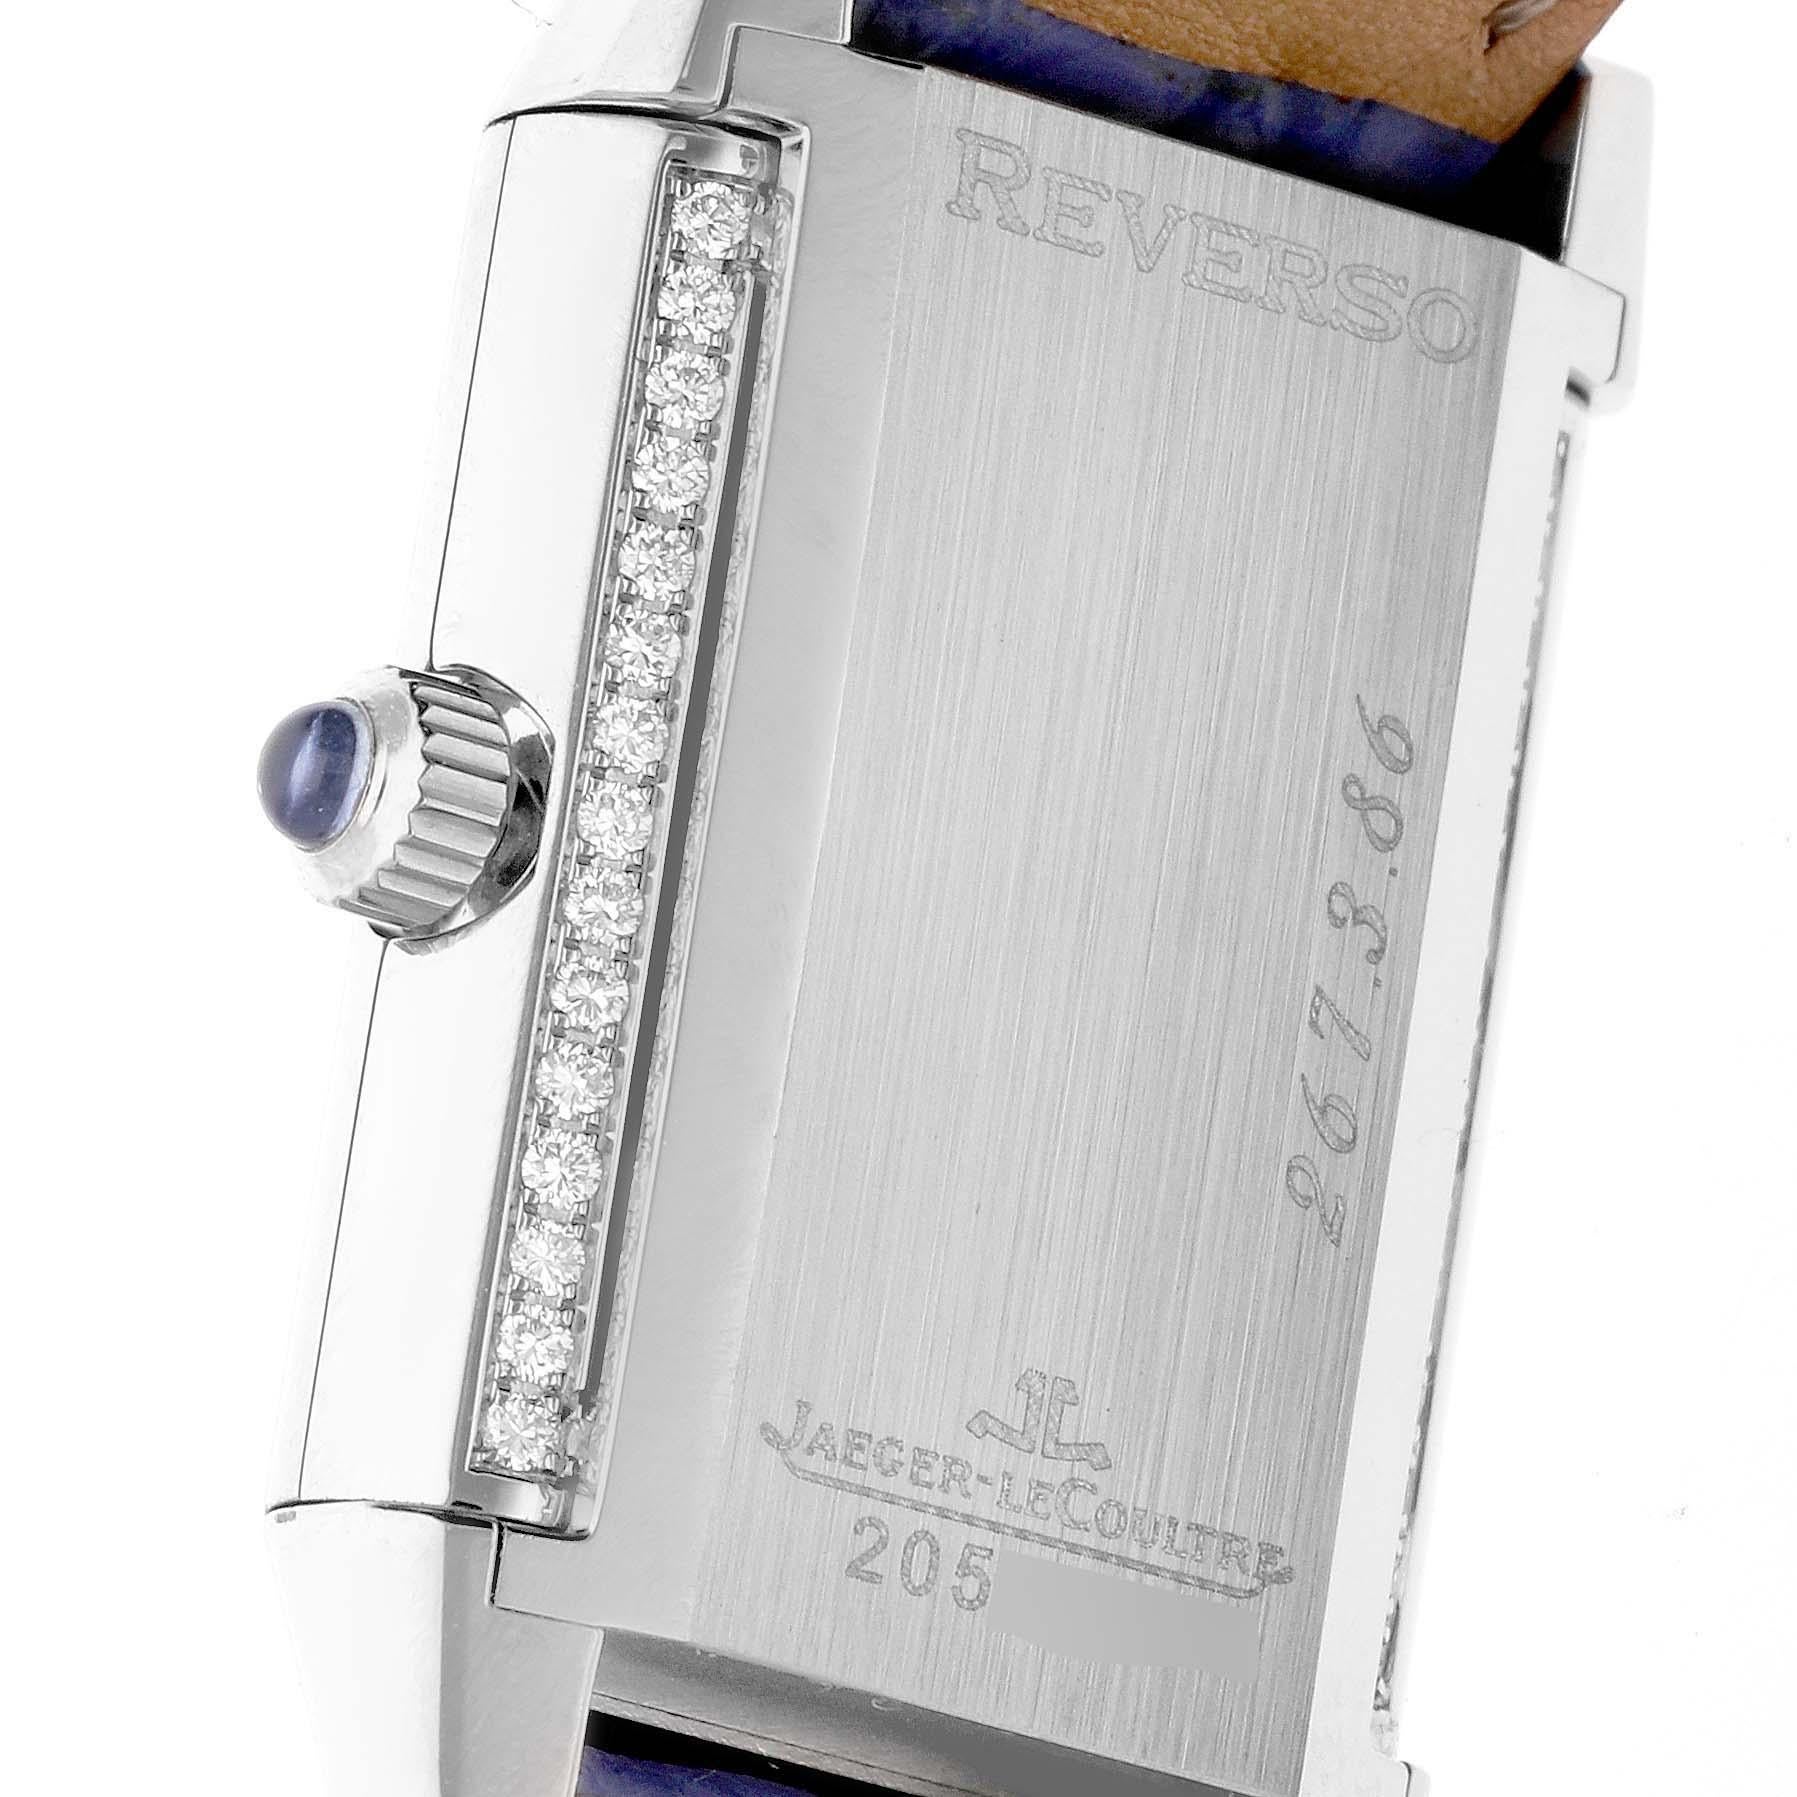 Jaeger LeCoultre Reverso Joaillerie White Gold Diamond Ladies Watch 267.3.86 Q2623403. Manual winding movement. 18K white gold 33 x 20 mm rectangular rotating case. Crown set with blue sapphire. Original JLC factory diamonds on case, bezel, and